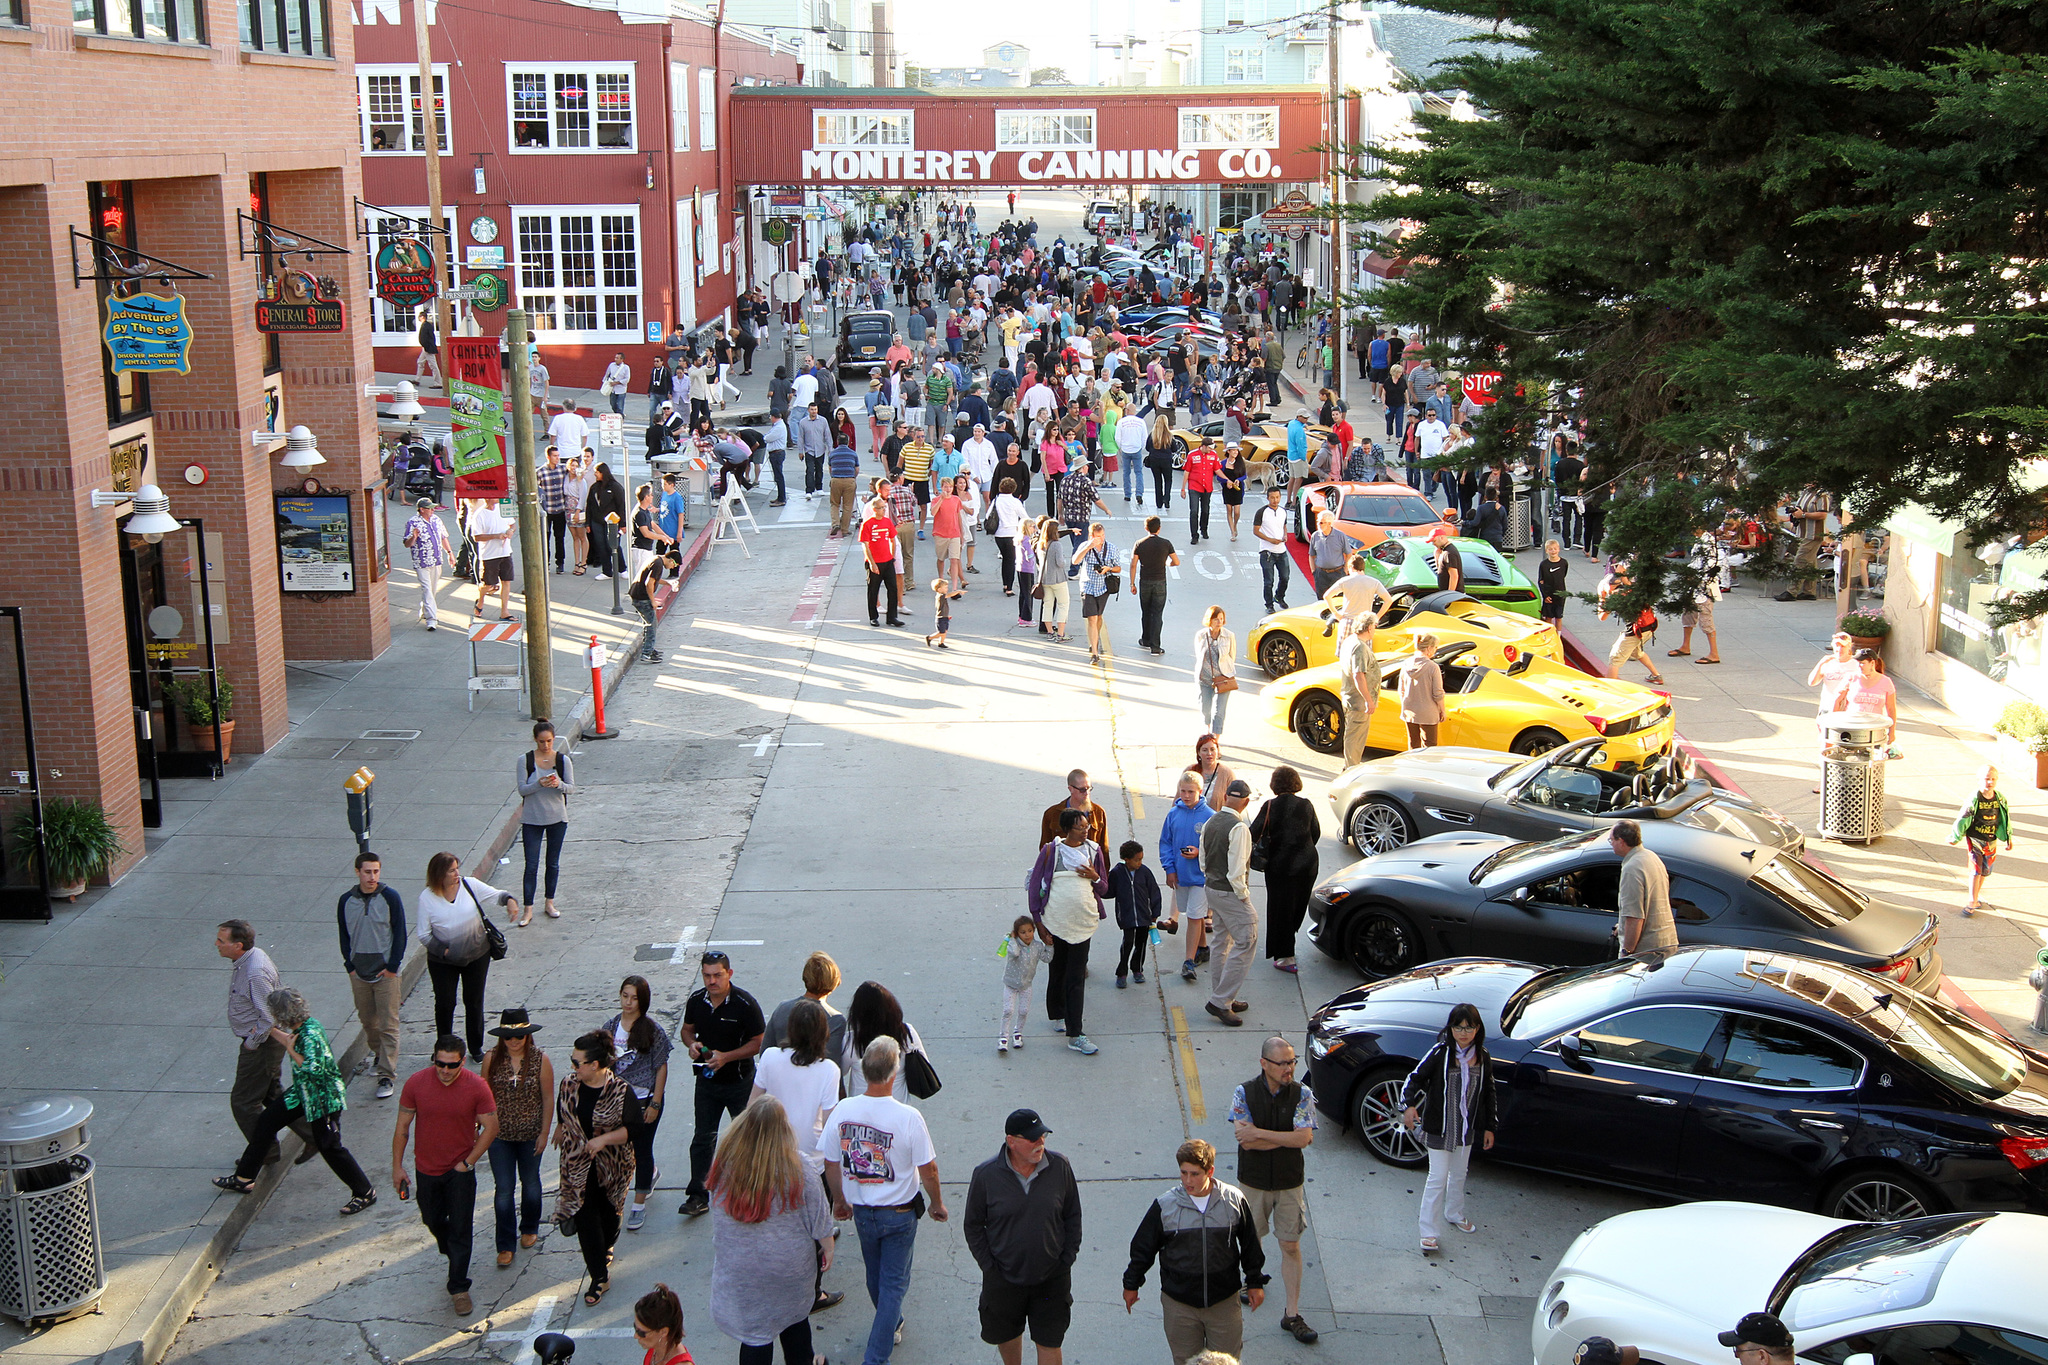 2015 Exotics on Cannery Row